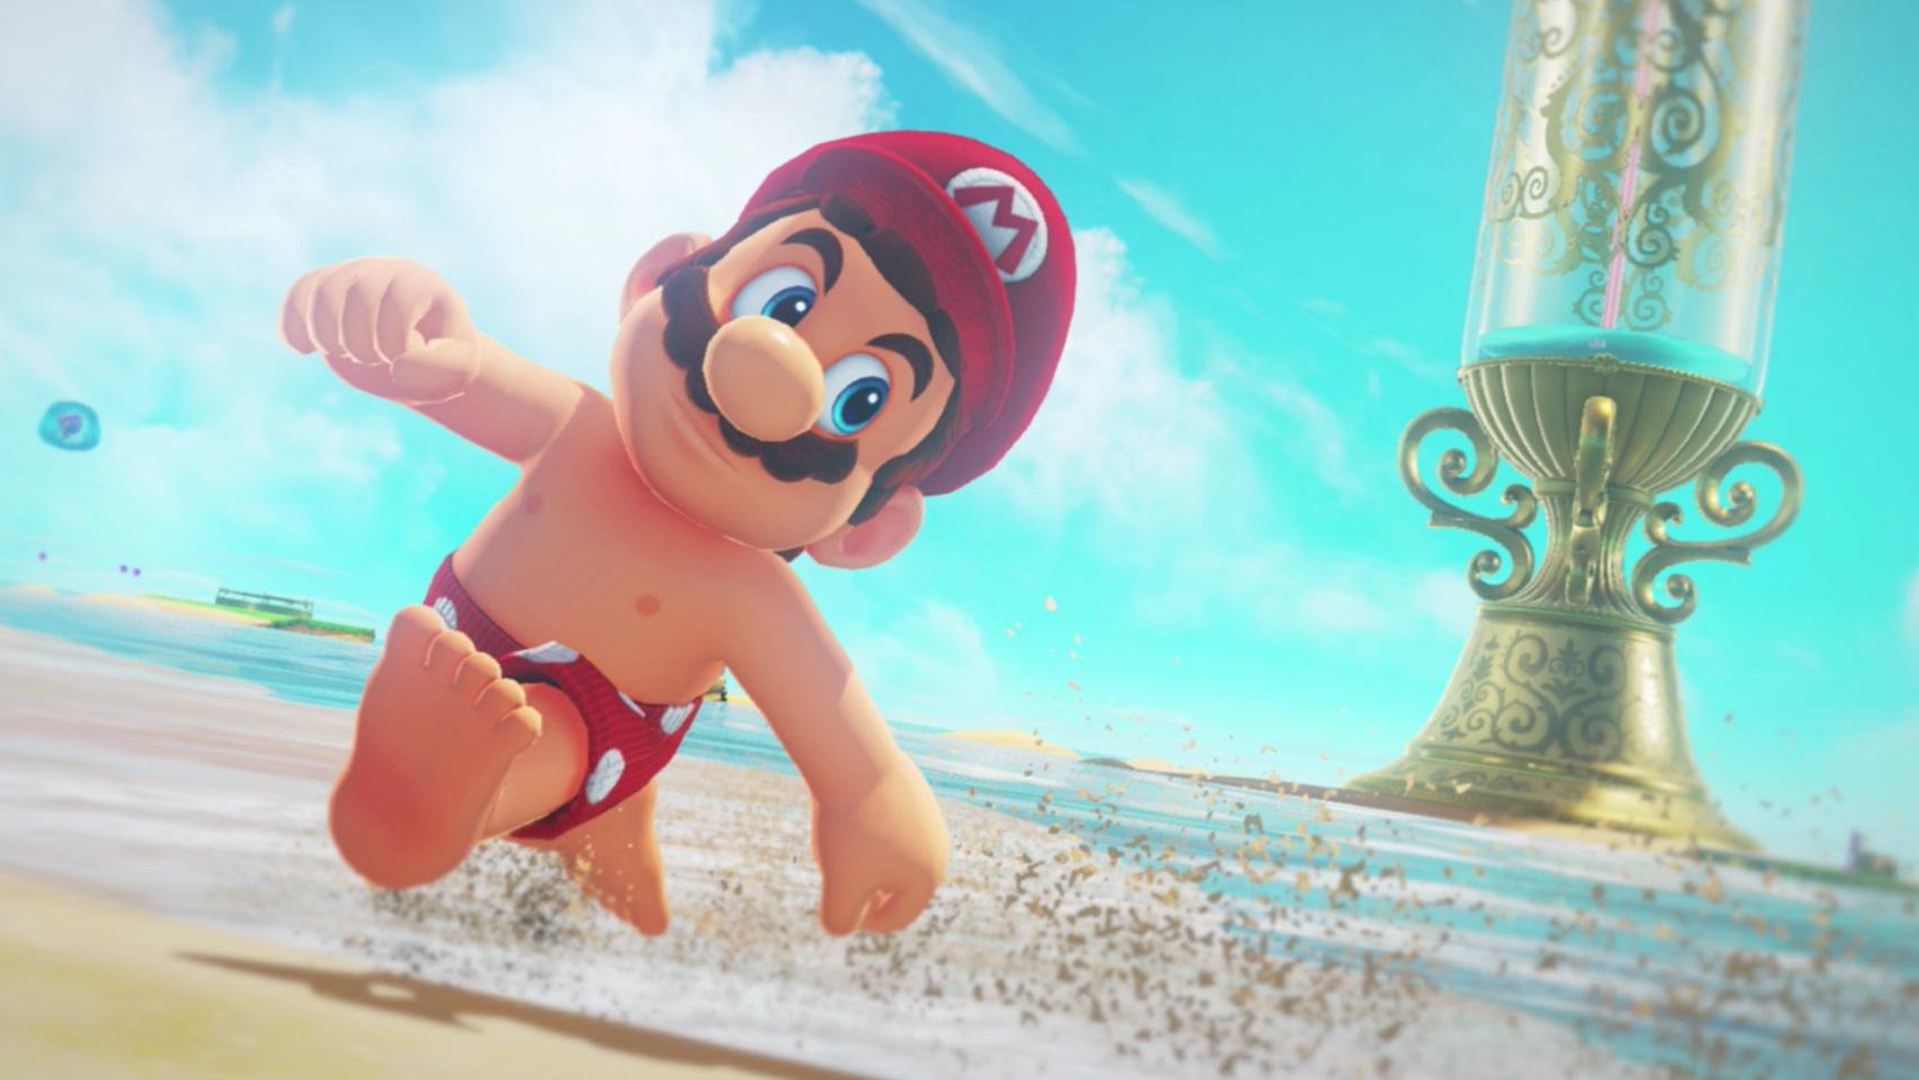 Super Mario Odyssey 2 Release Date Switch, PS4, PS5, Xbox, PC